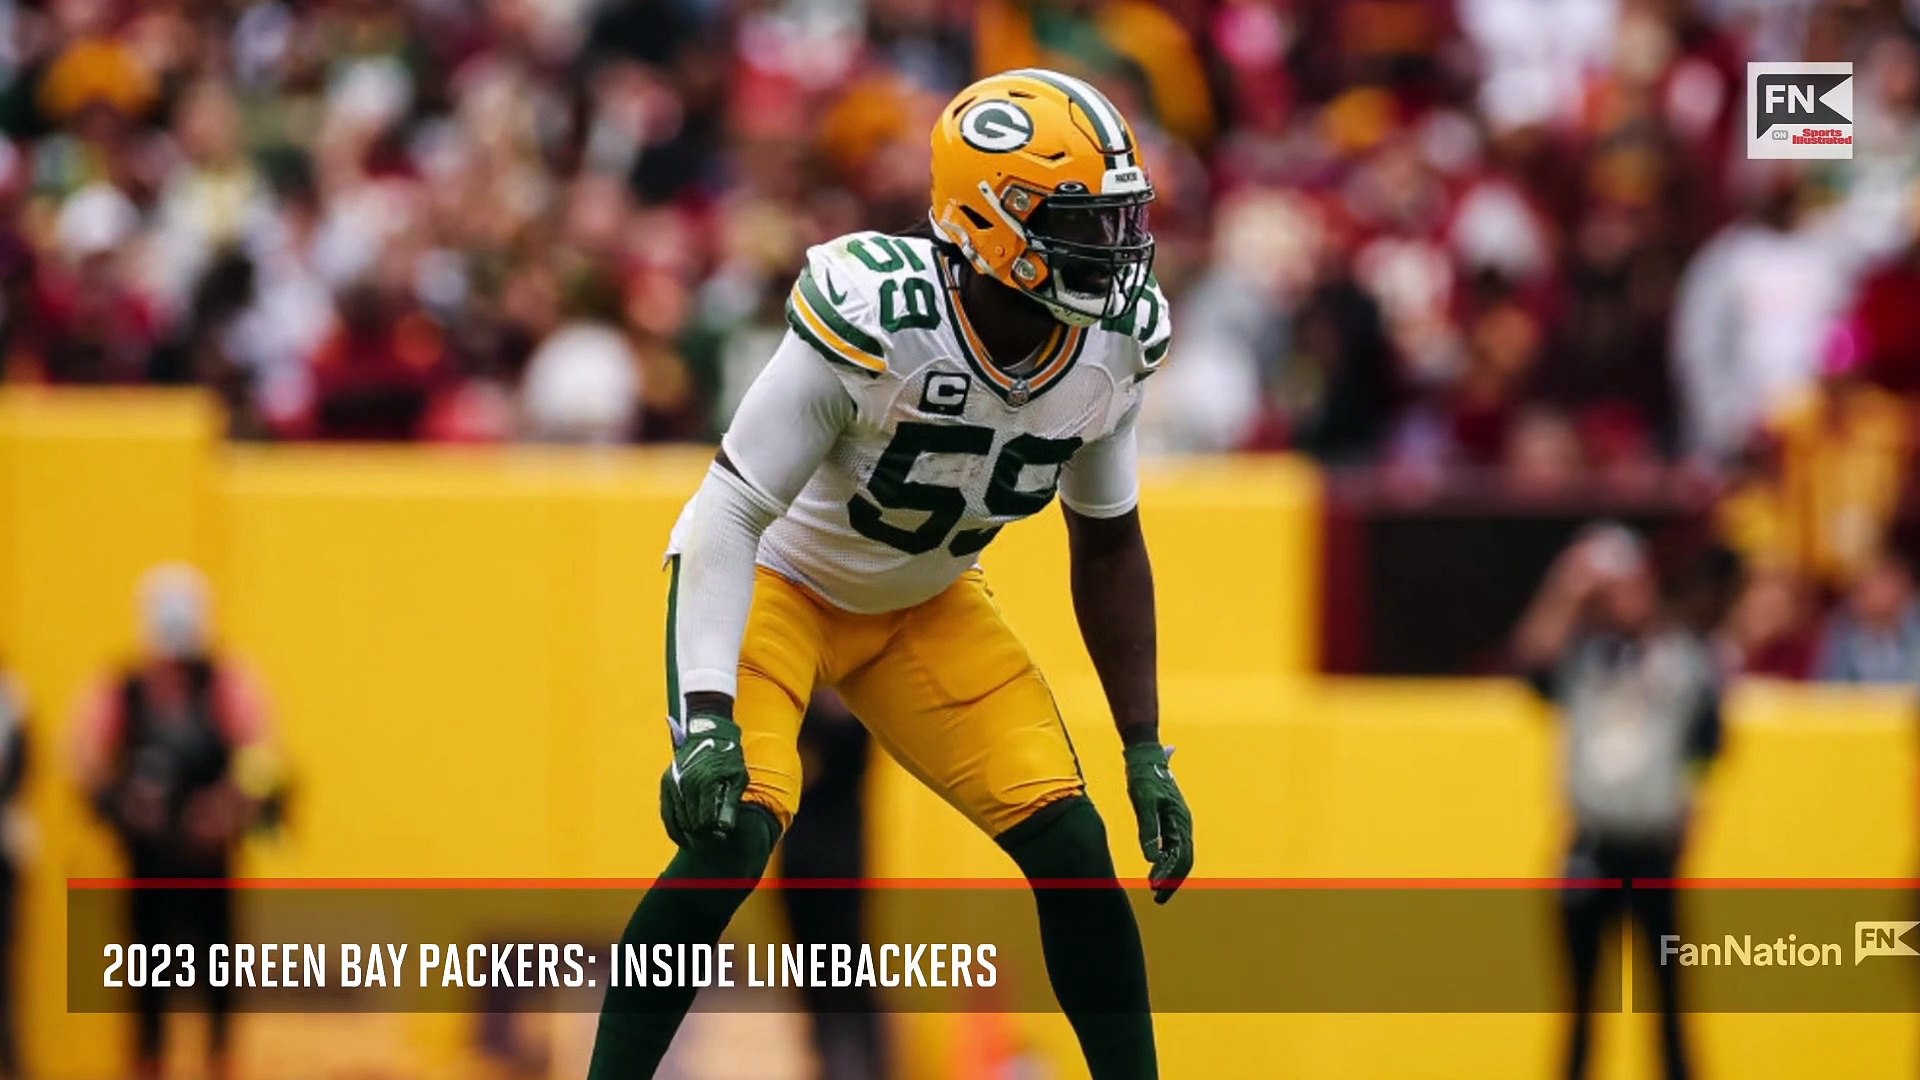 2023 Green Bay Packers: Inside Linebackers - video Dailymotion